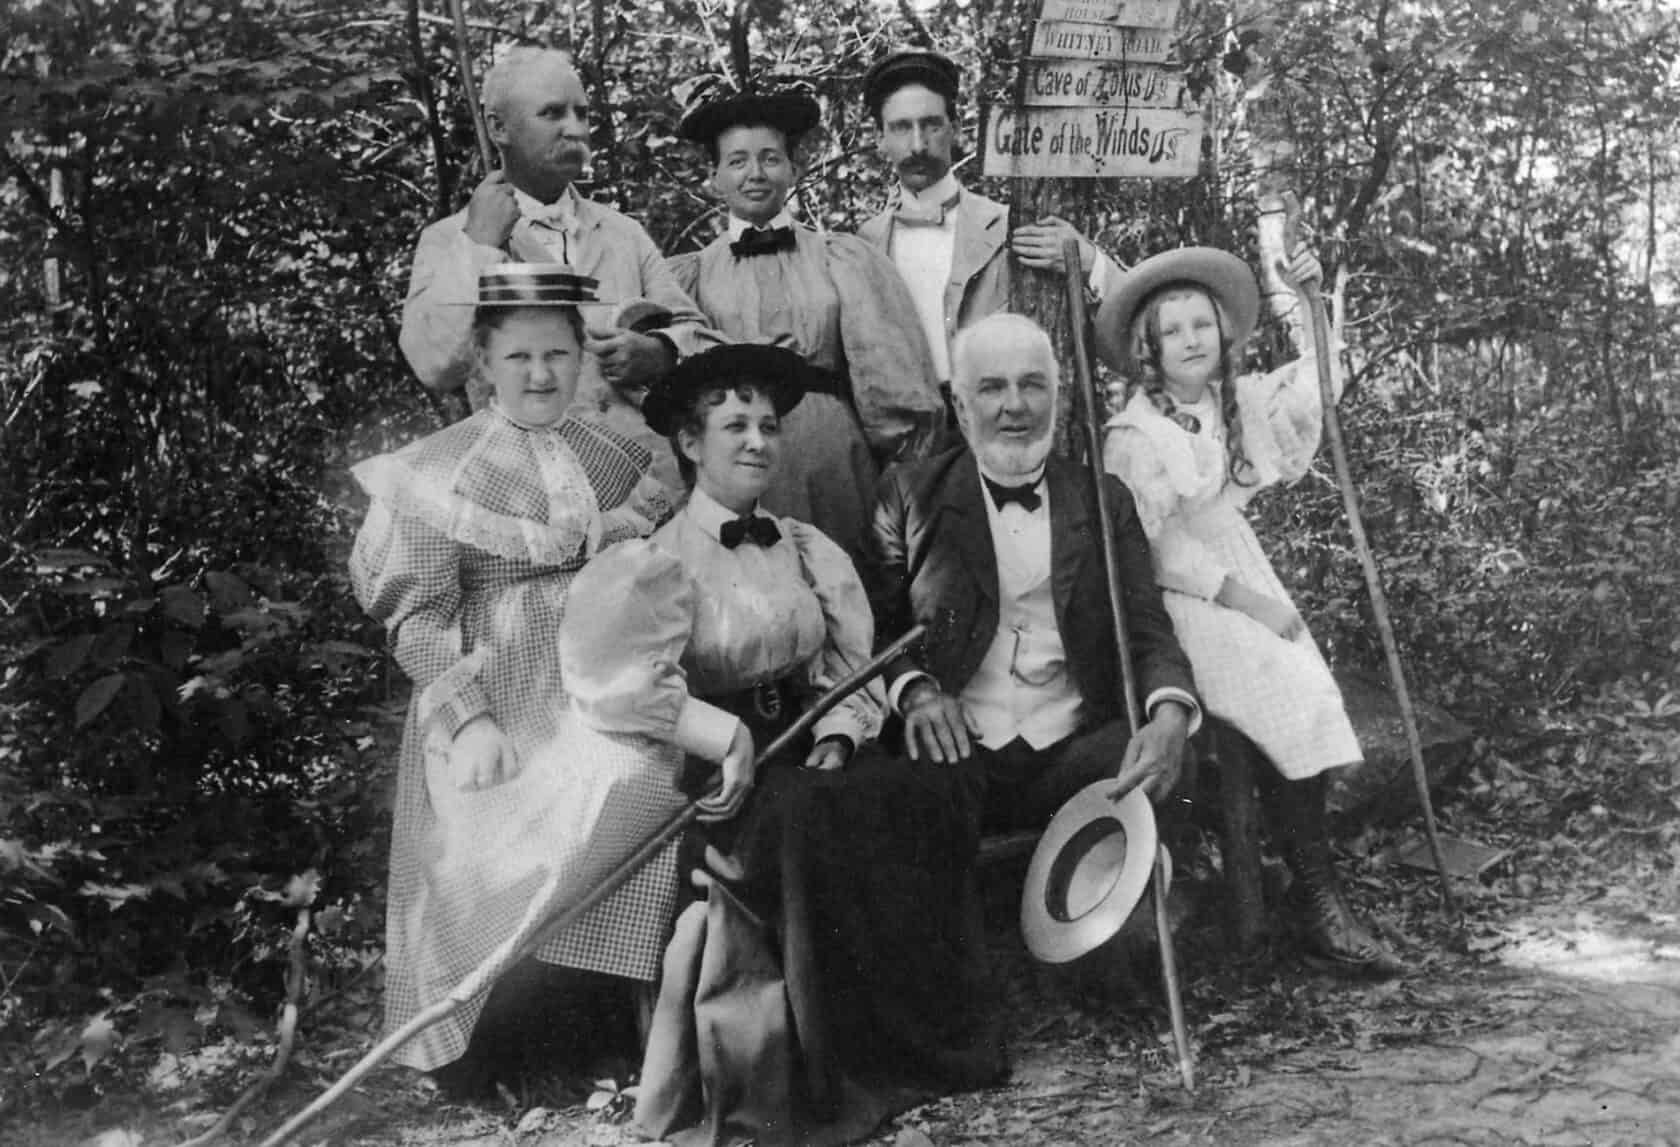 Albert Smiley leads a hike with guests, 1895